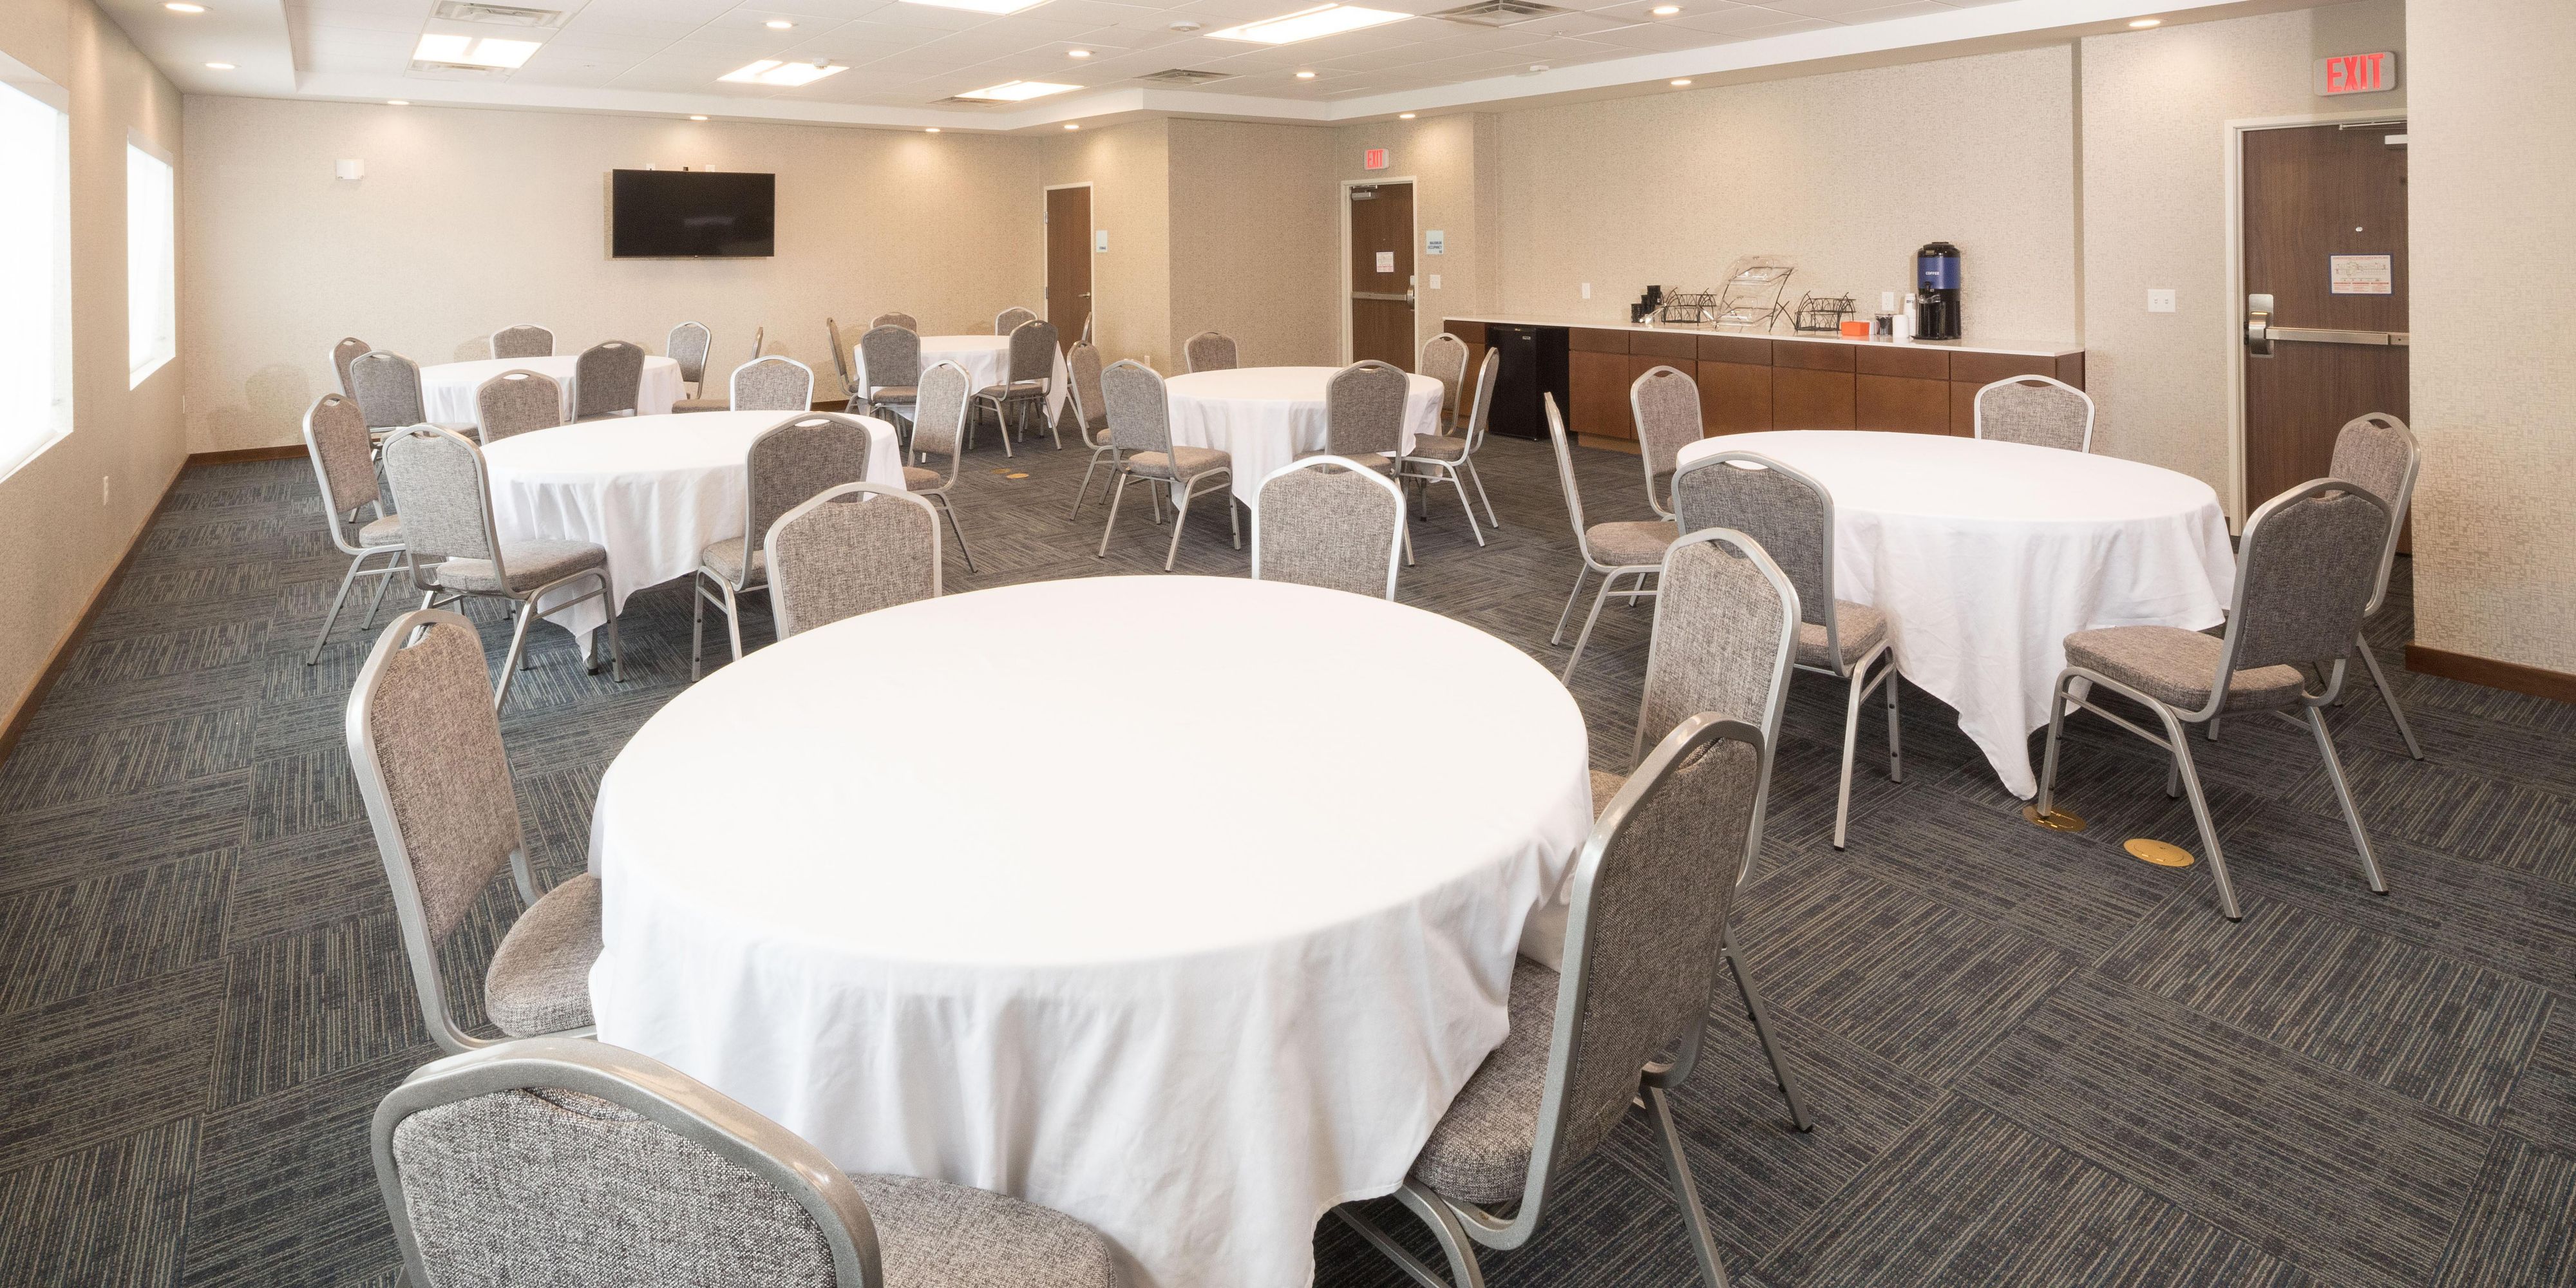 Our versatile meeting spaces will accommodate up to 65 people depending on seating style.  Whether you are planning a business or social event, we are pleased to be of service to you and your attendees.  Please contact Hailey Walsh directly to discuss your upcoming needs at hailey.walsh@amerilodgegroup.com or at 269-447-1700.